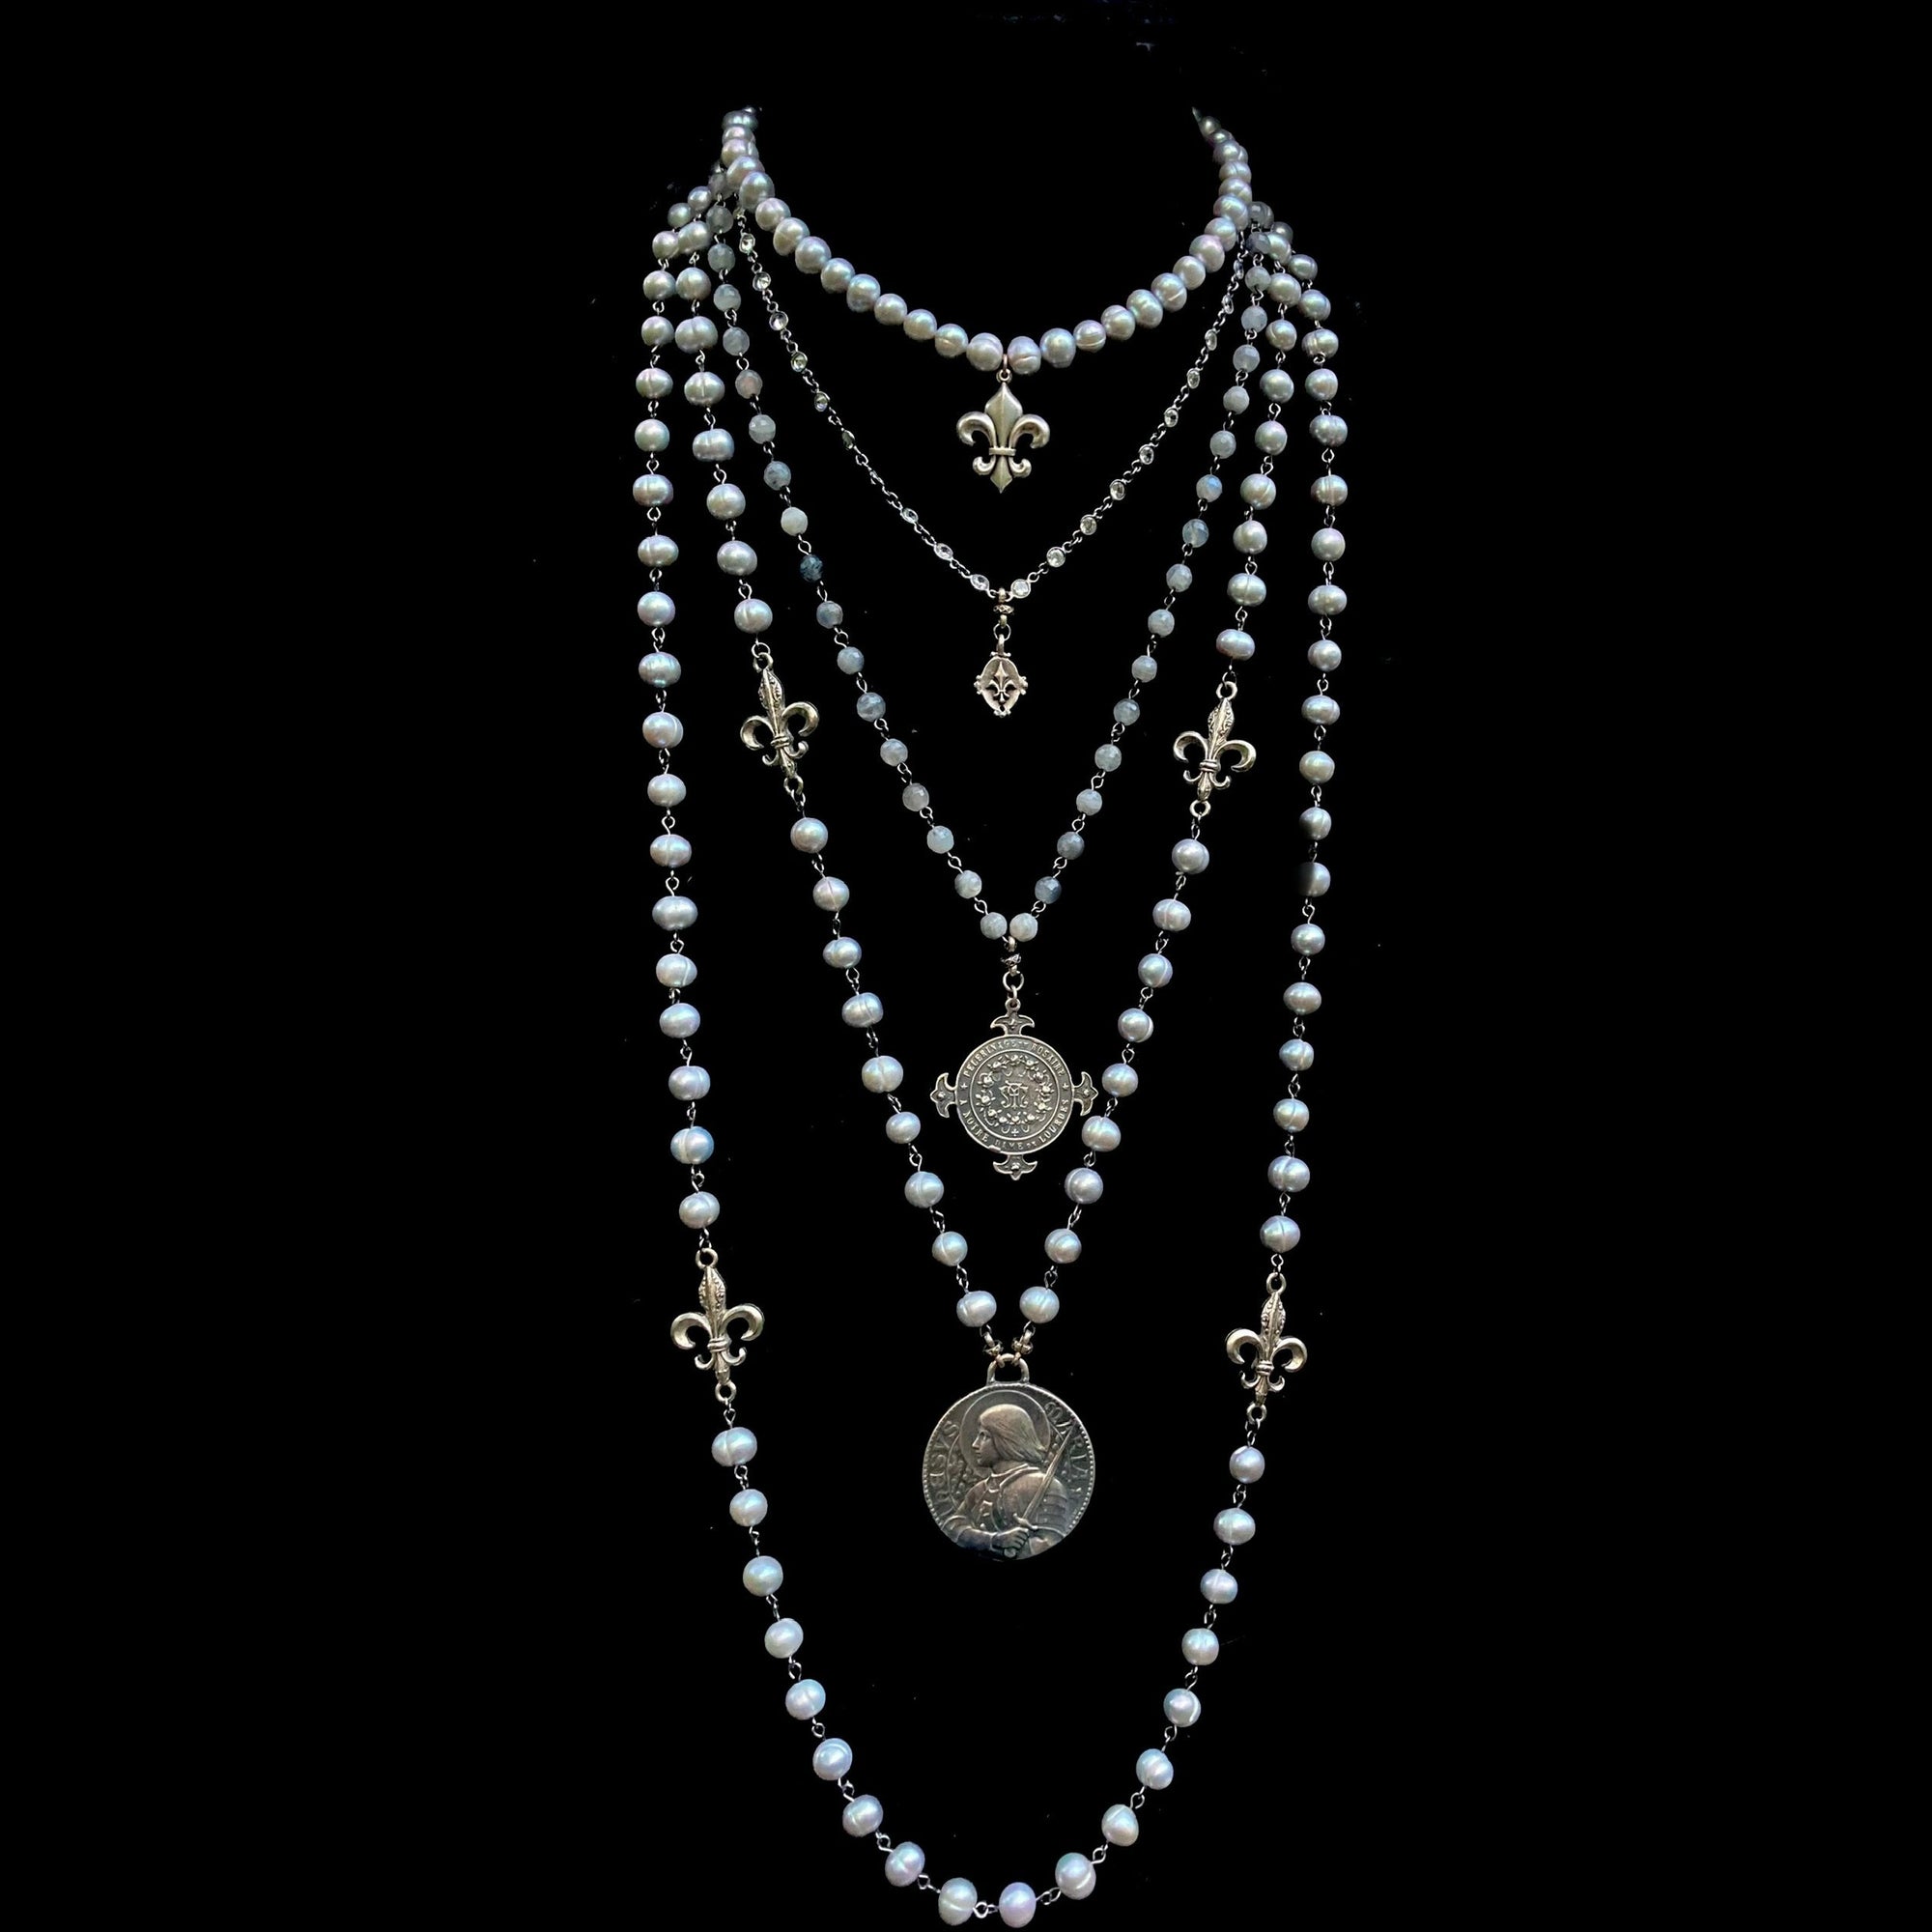 Moonglow Lourdes Illumination Necklace with Fleur de Lis by Whispering Goddess